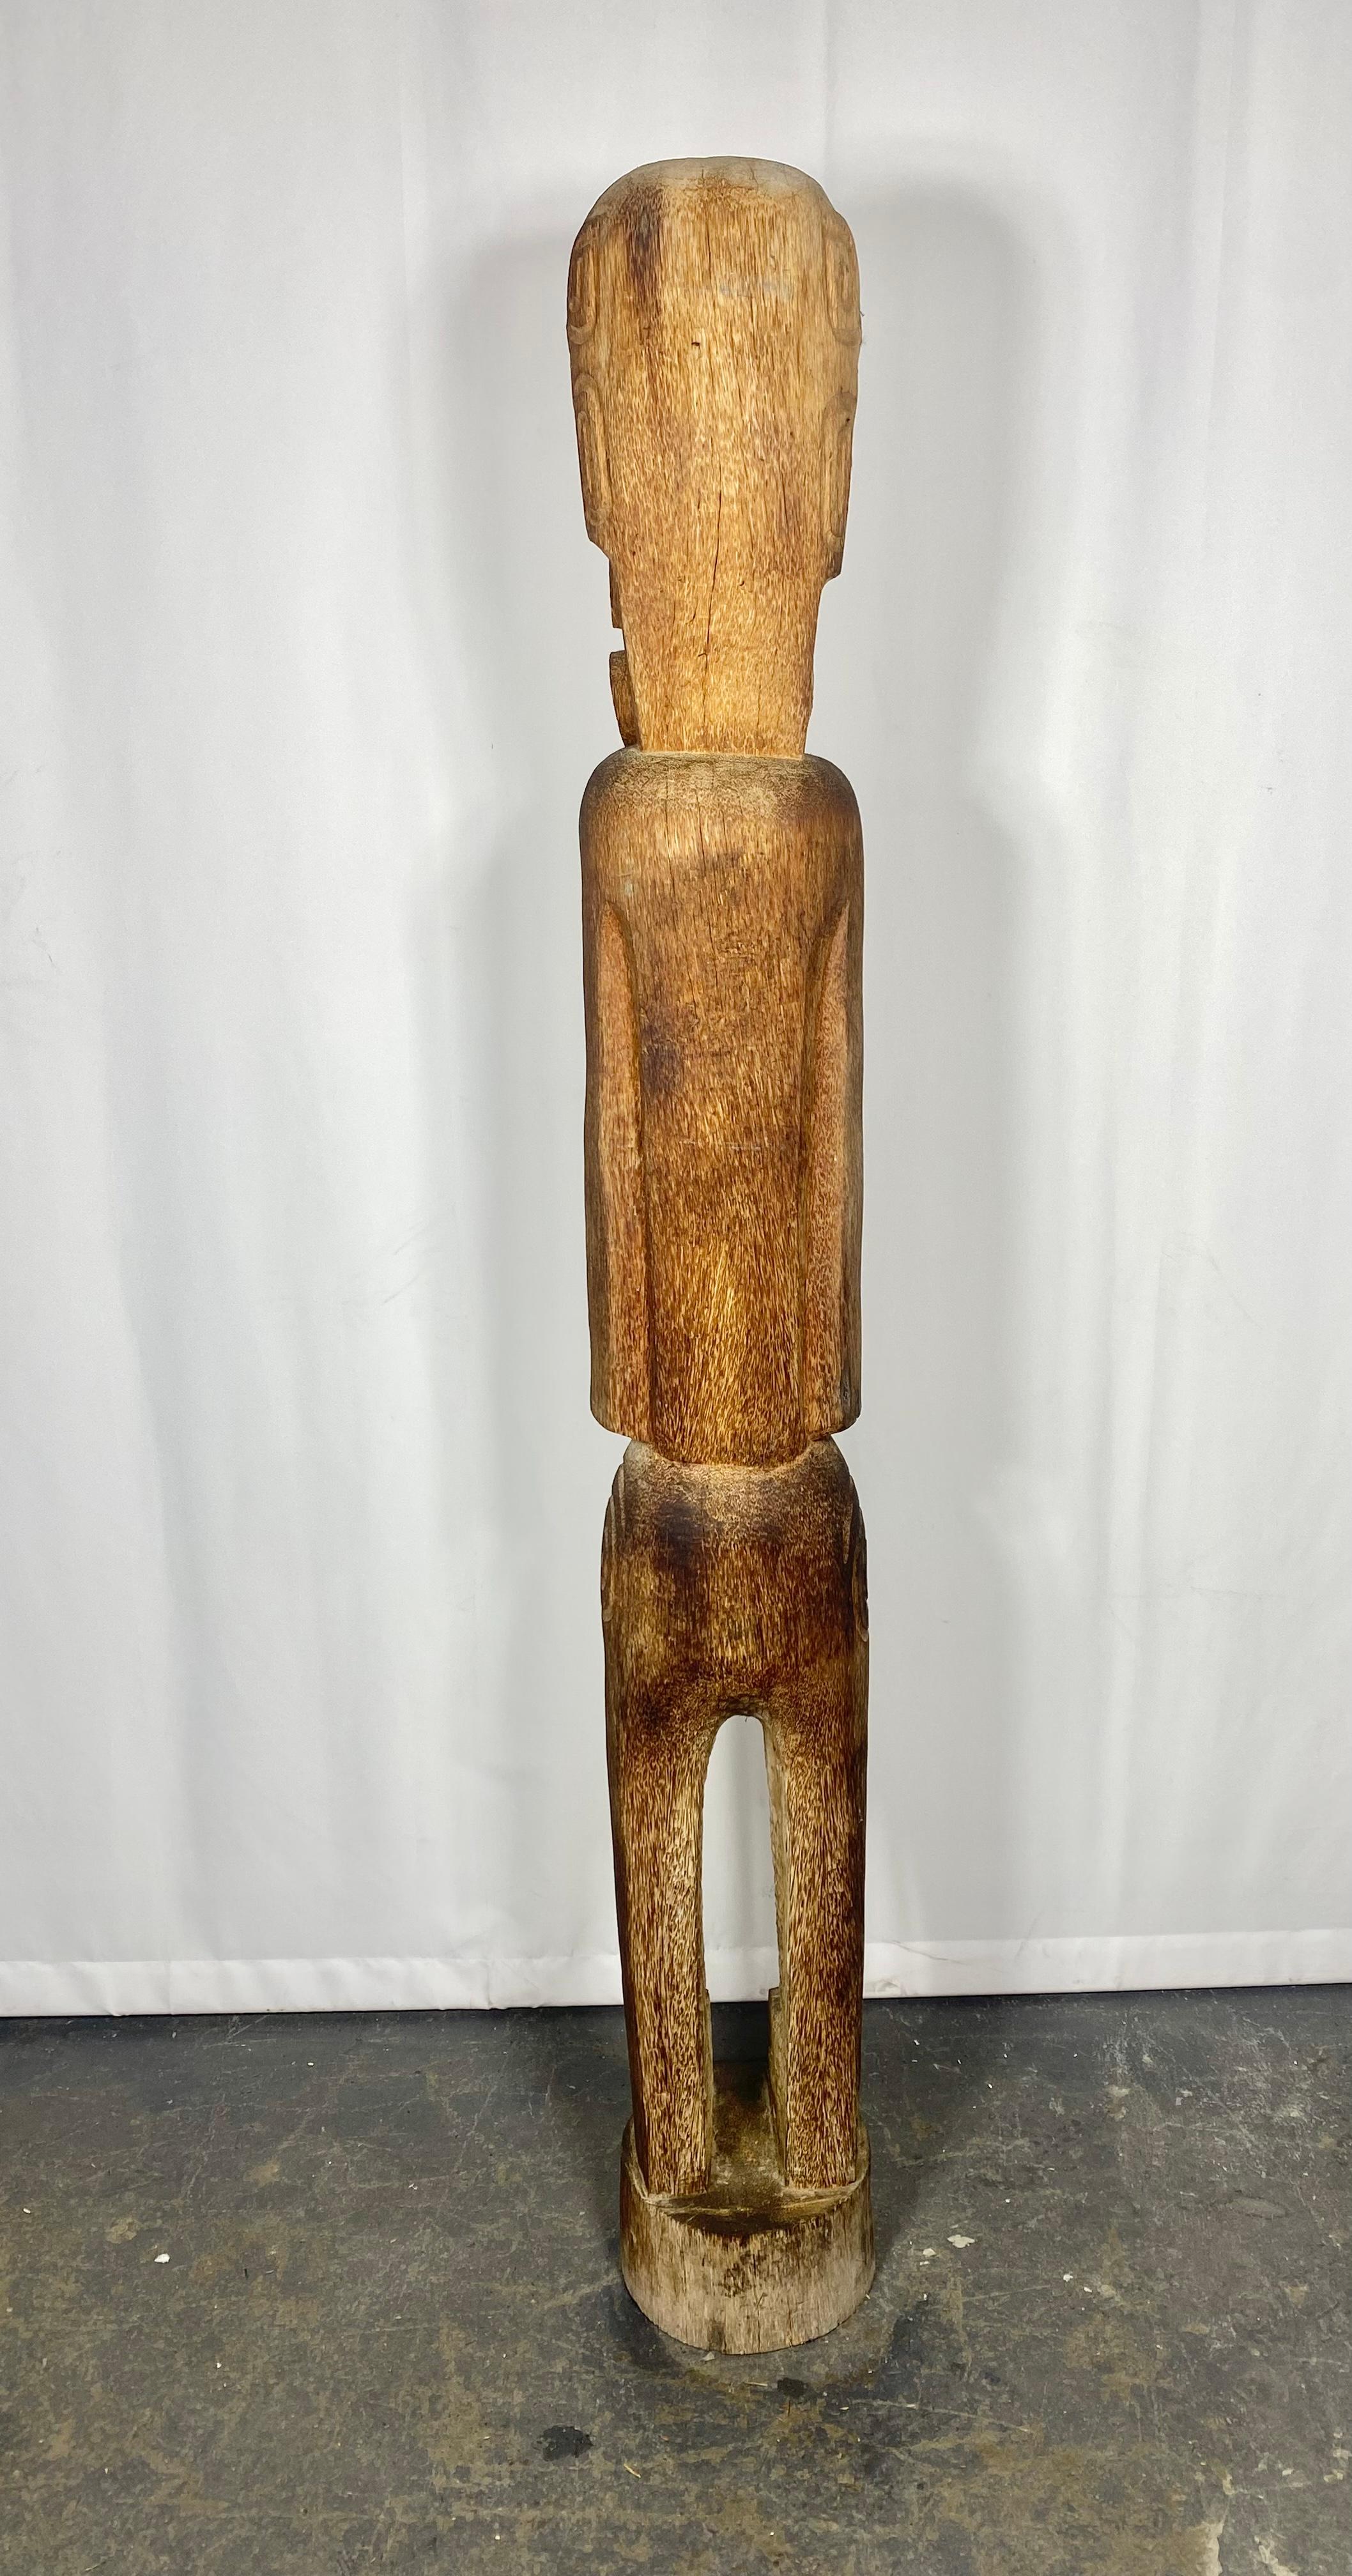 Hand-Carved Vintage Monumental Carved Wood Tiki Sculpture. French Polynesia. Creation Sanobo For Sale